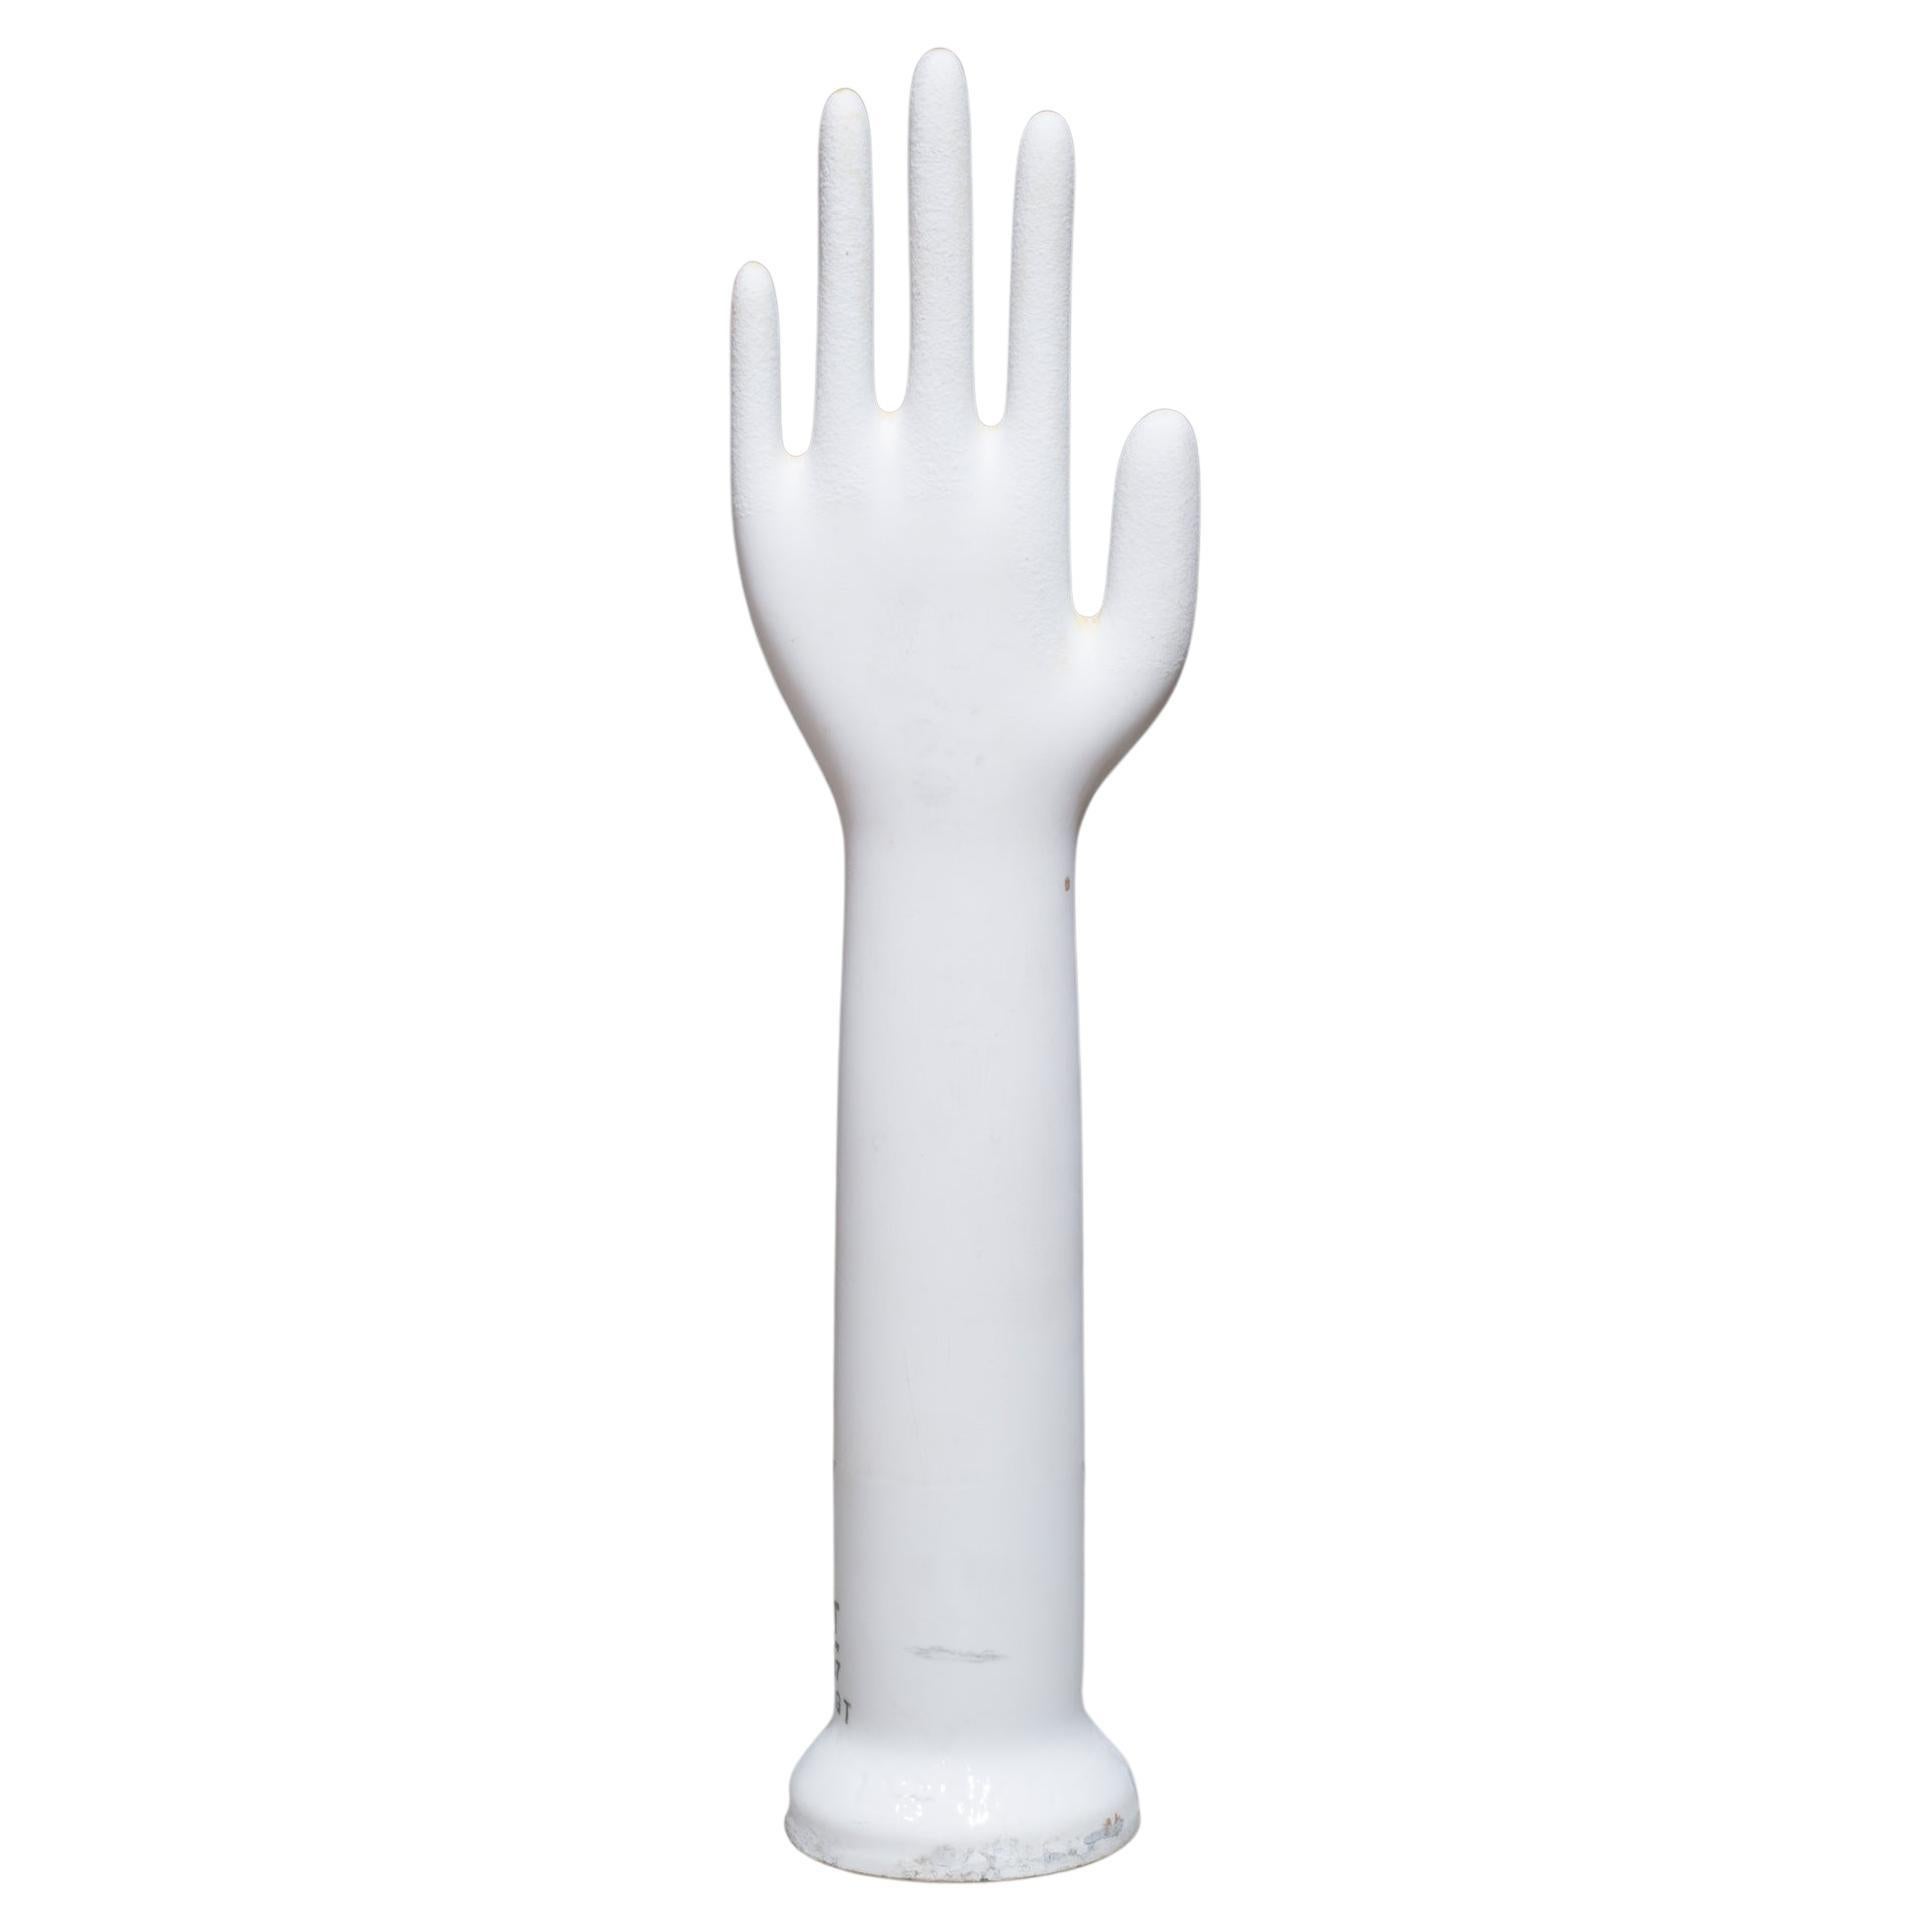 West German Glazed Porcelain Factory Rubber Glove Molds, c.1987  (FREE SHIPPING)